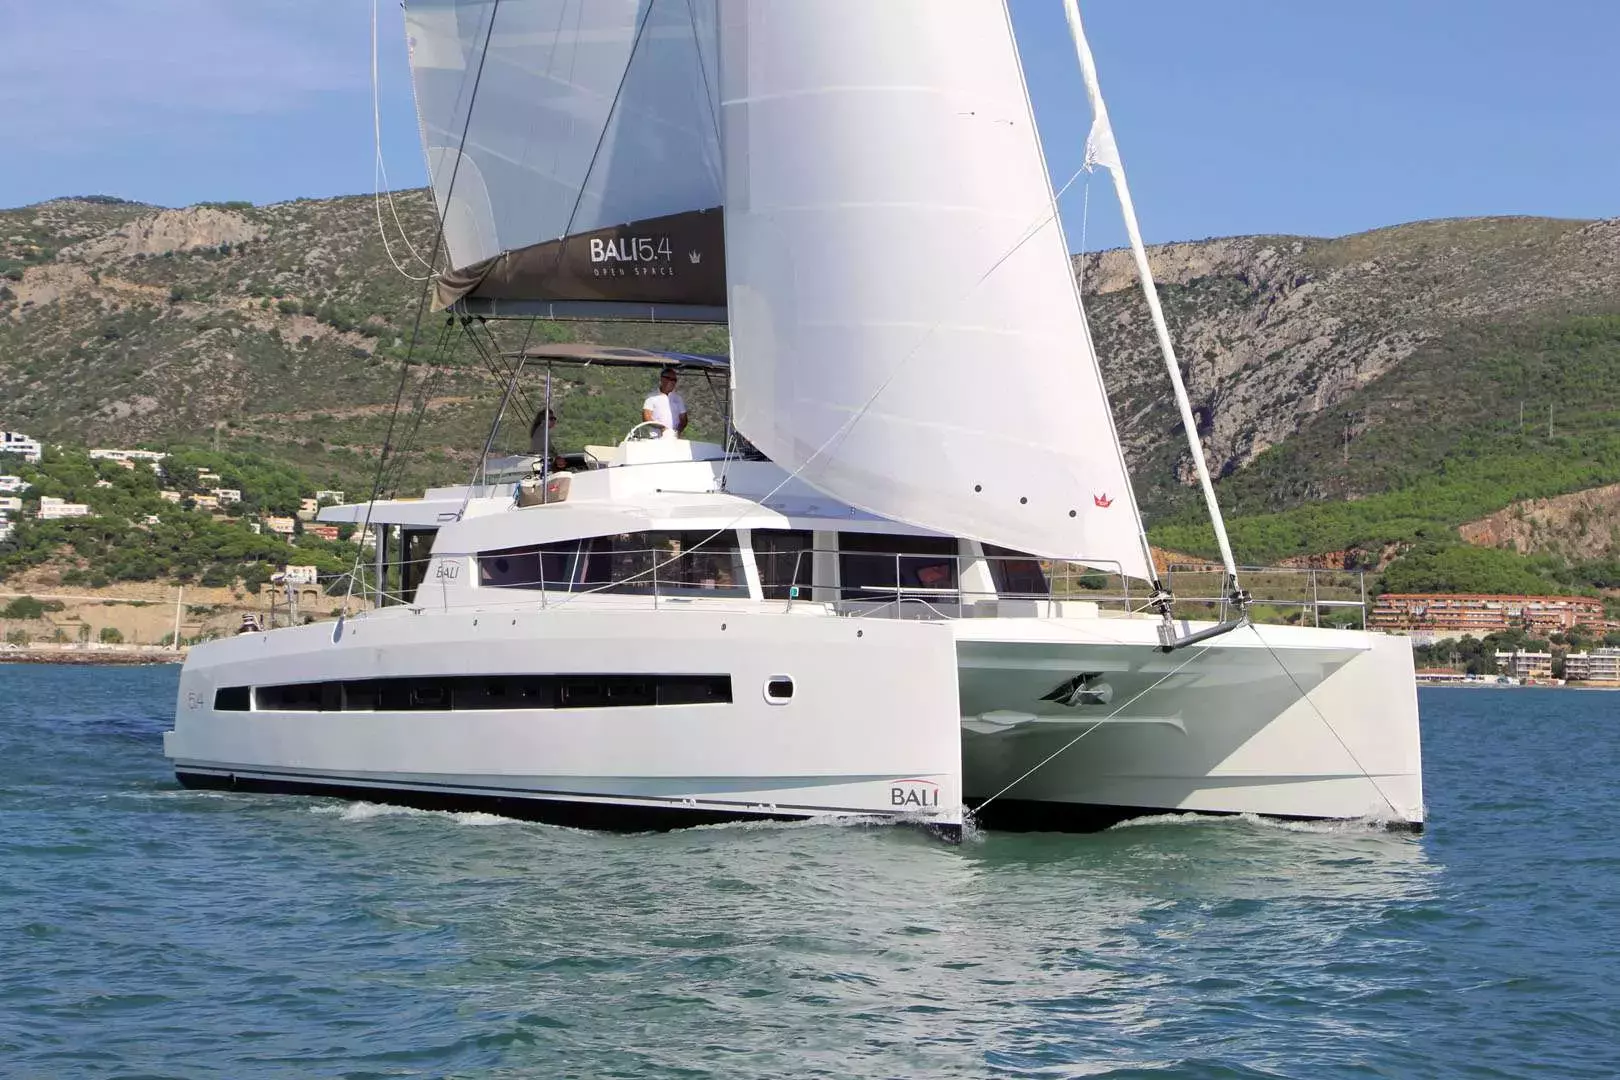 Mim Ocean One by Bali Catamarans - Top rates for a Charter of a private Sailing Catamaran in St Barths